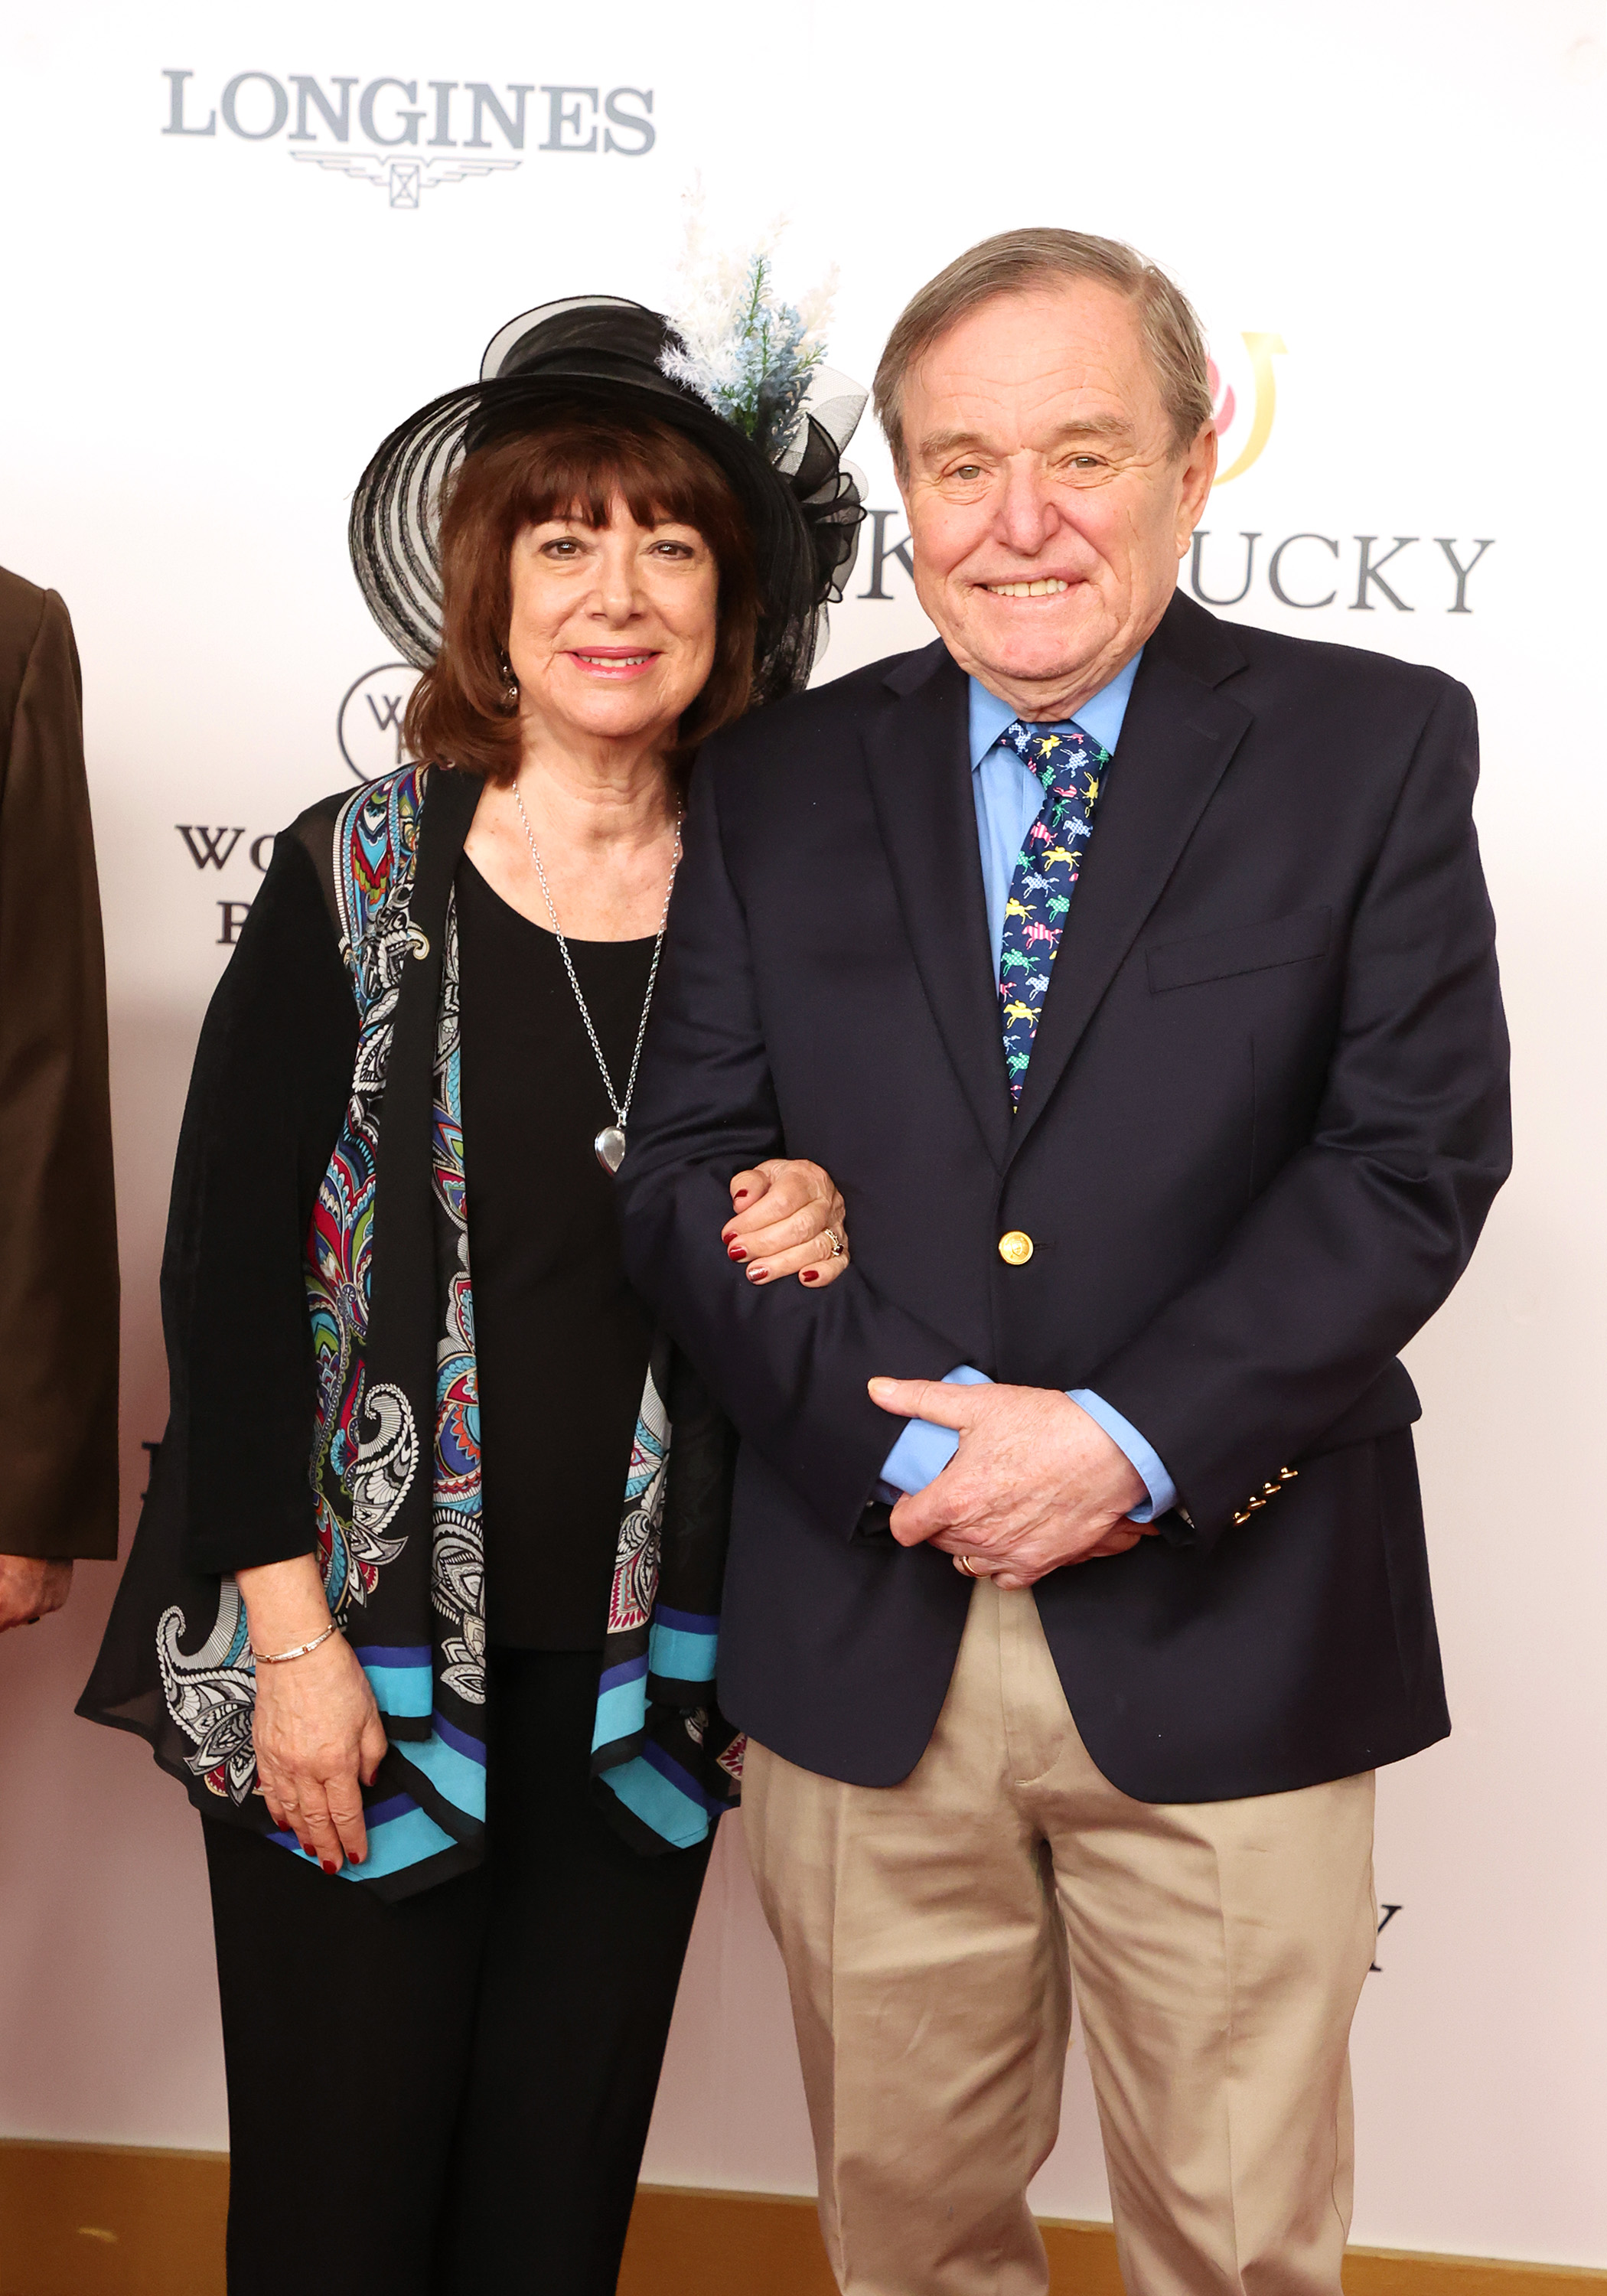 Teresa Modnick and Jerry Mathers at the 149th run of the Kentucky Derby in Louisville, 2023 | Source: Getty Images